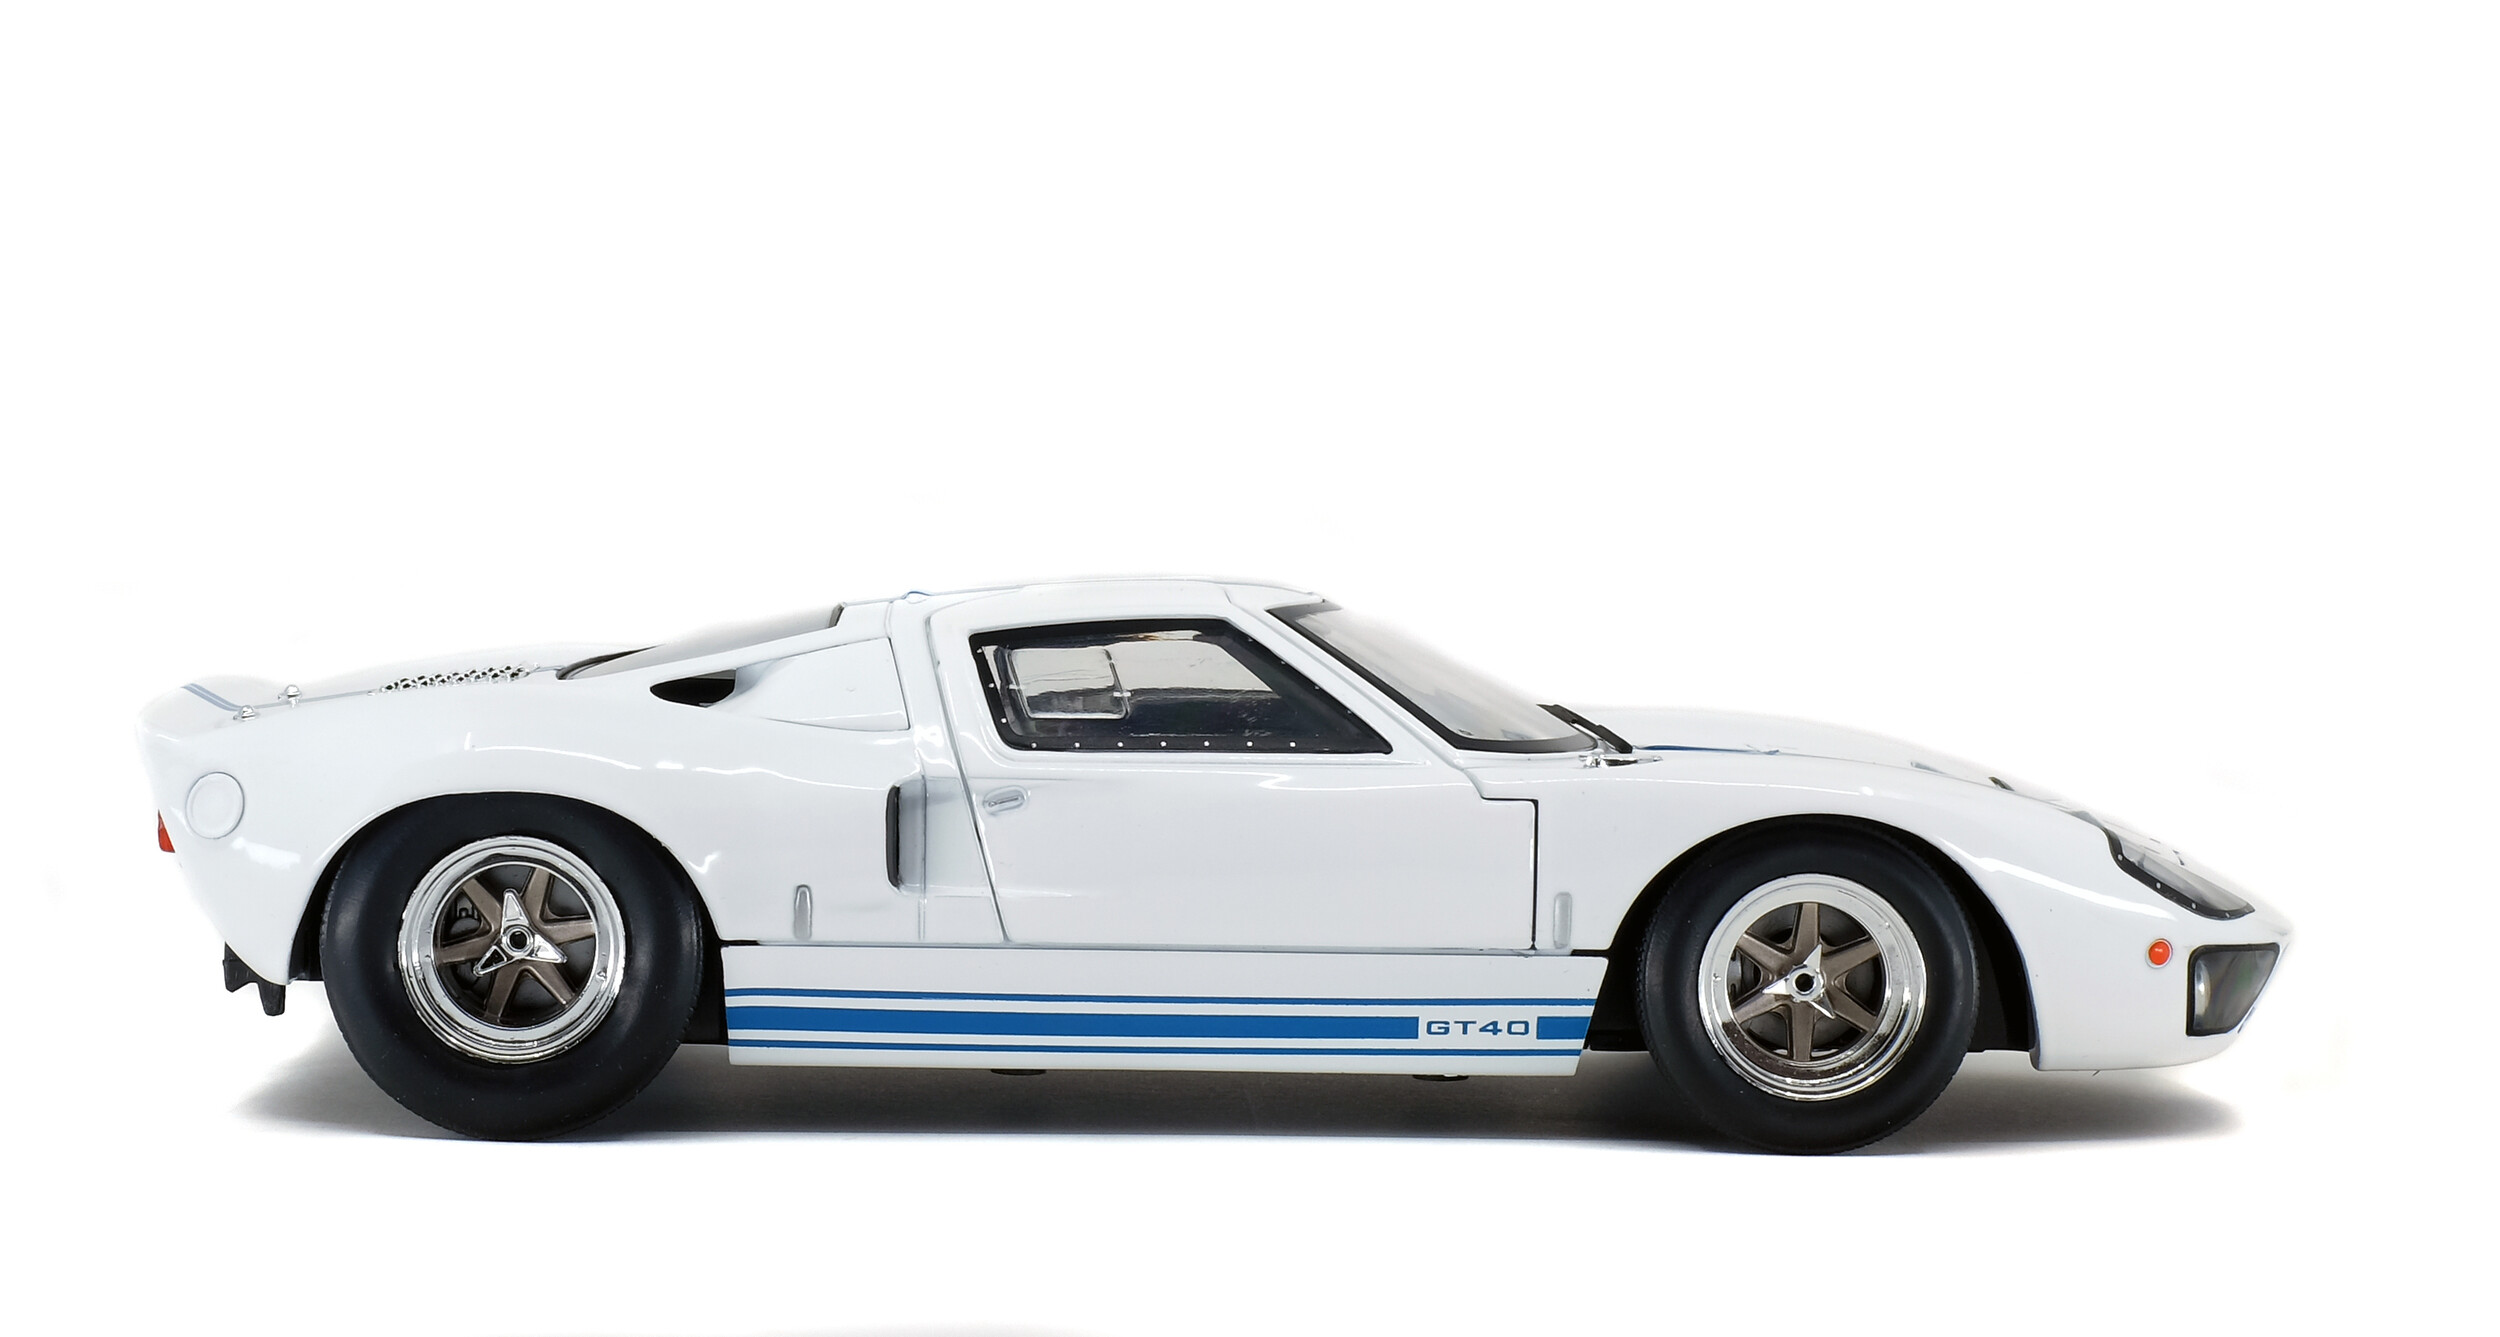 1/18 Solido 1968 Ford GT 40 MKI with Stripes Diecast Model Car White S1803002 